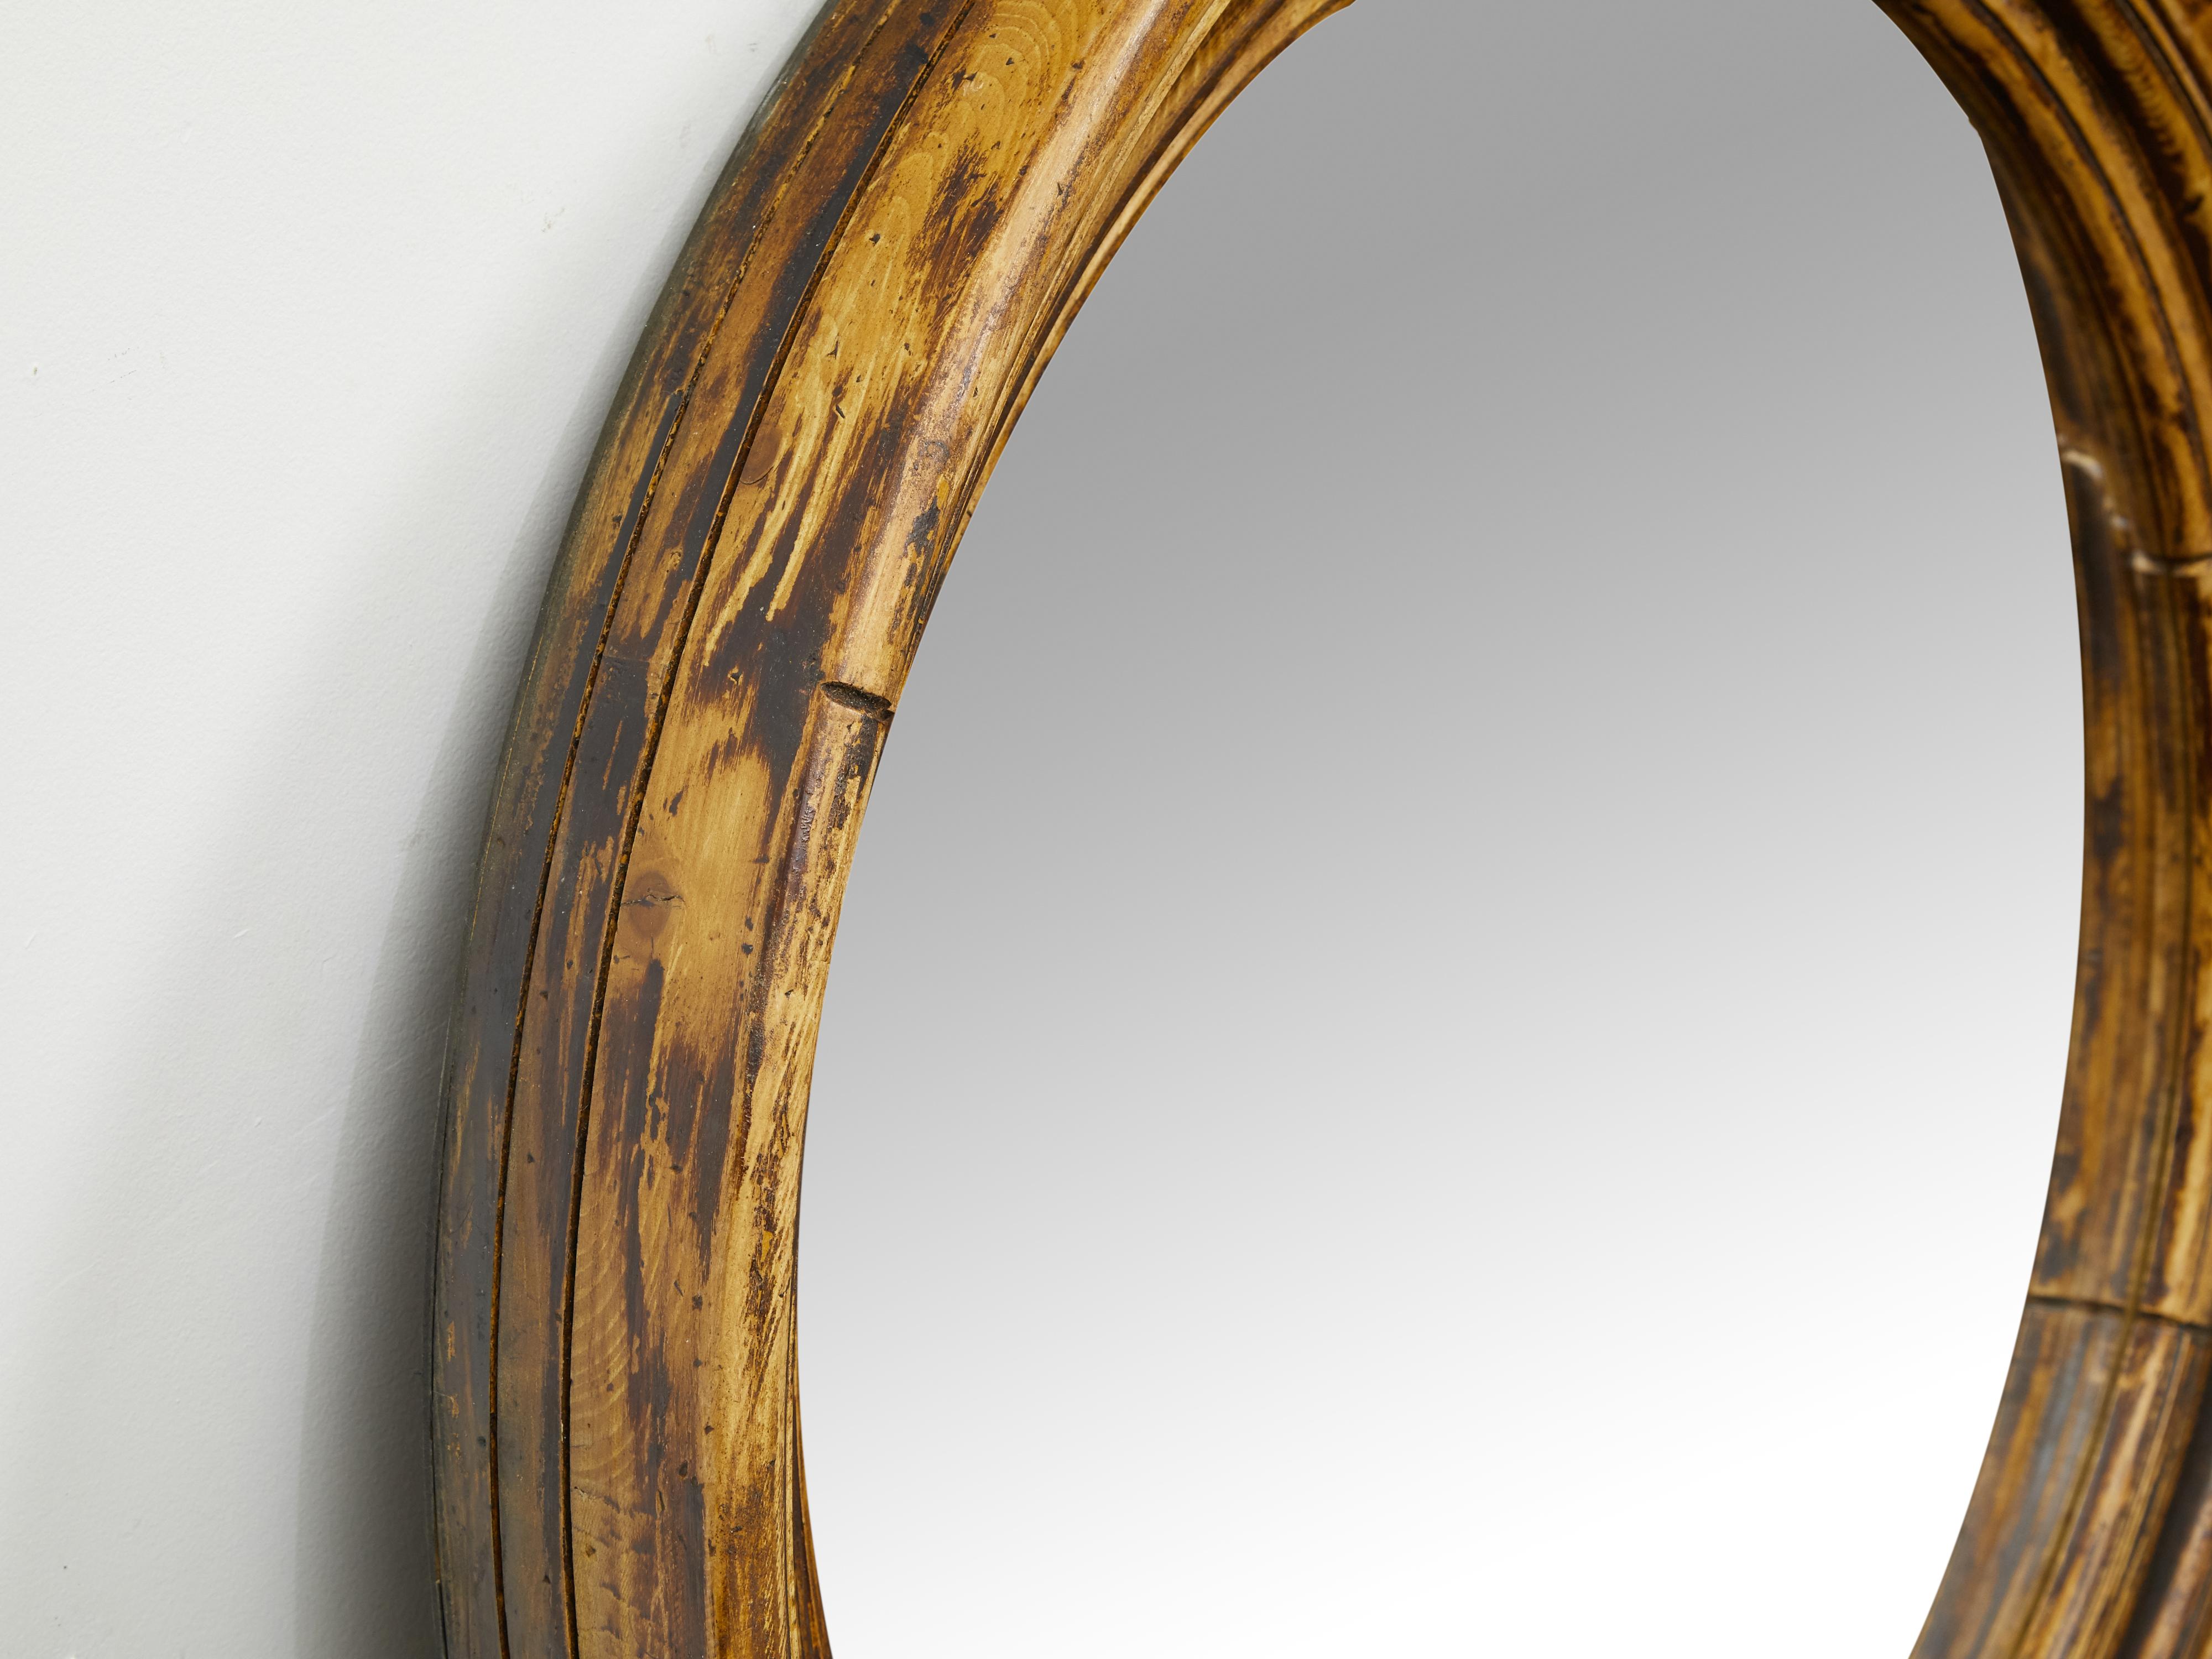 20th Century English Midcentury Circular Pine Mirror with Weathered Appearance